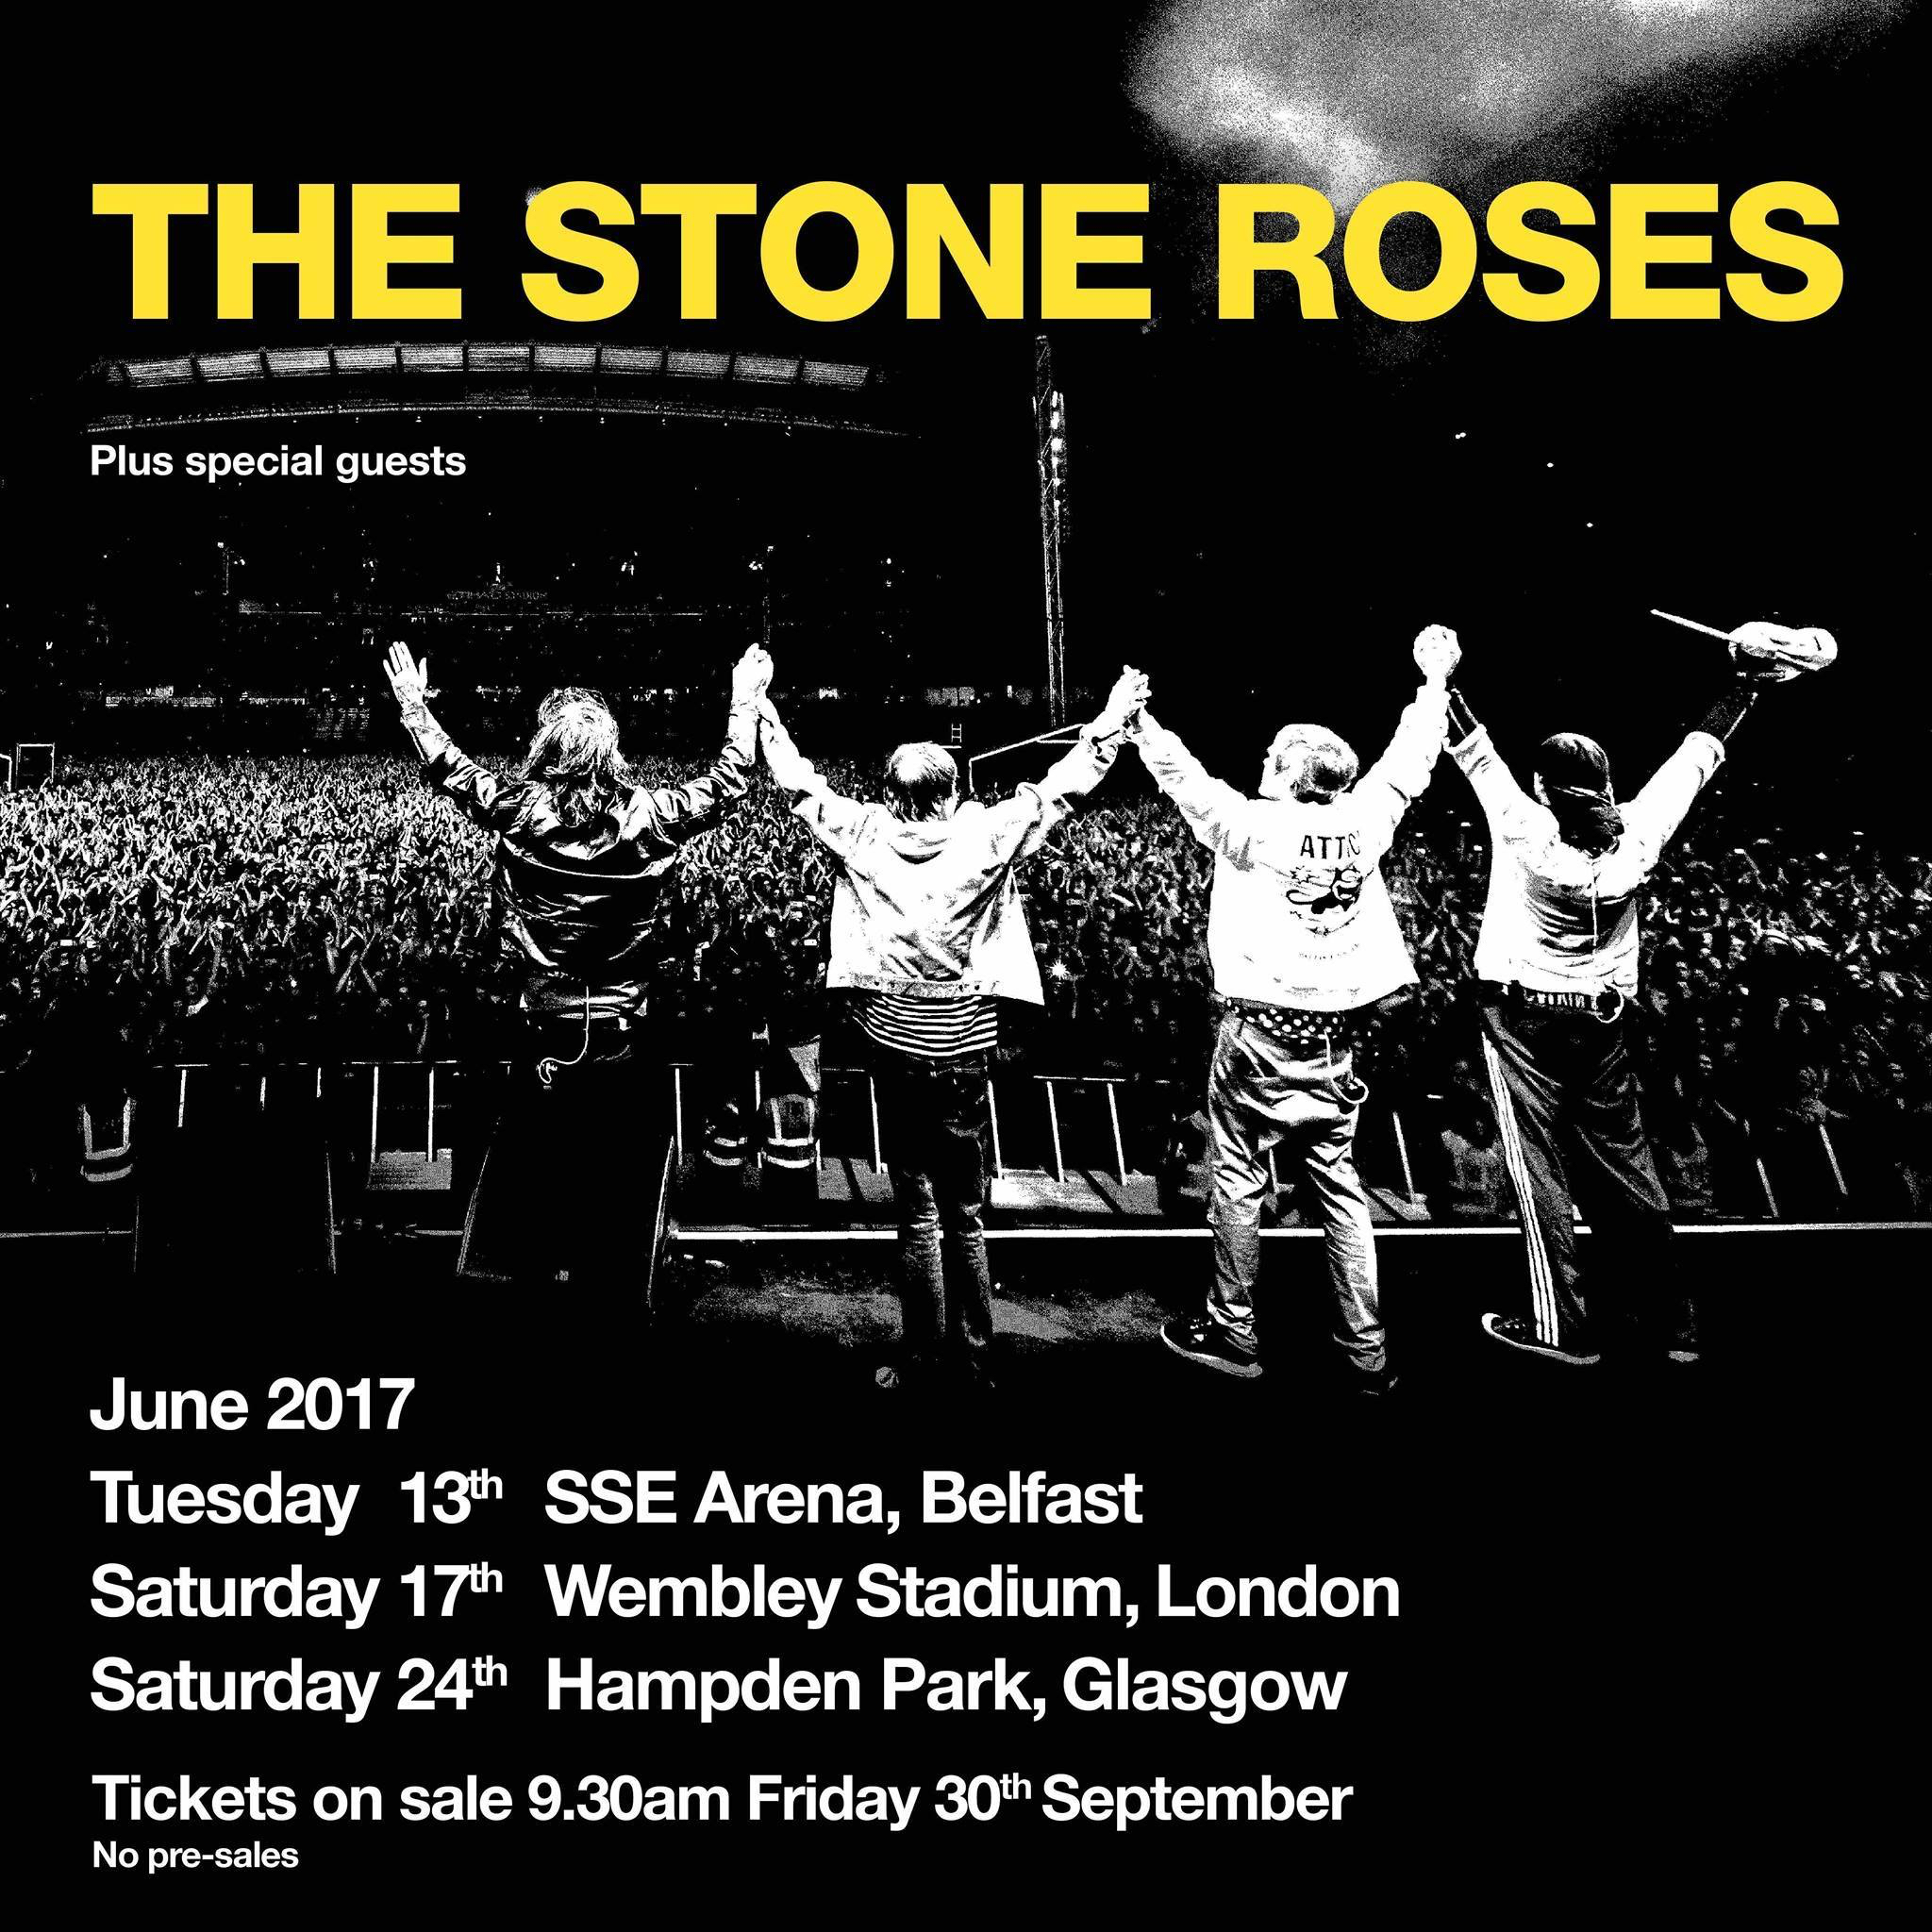 Copy of The Stone Roses